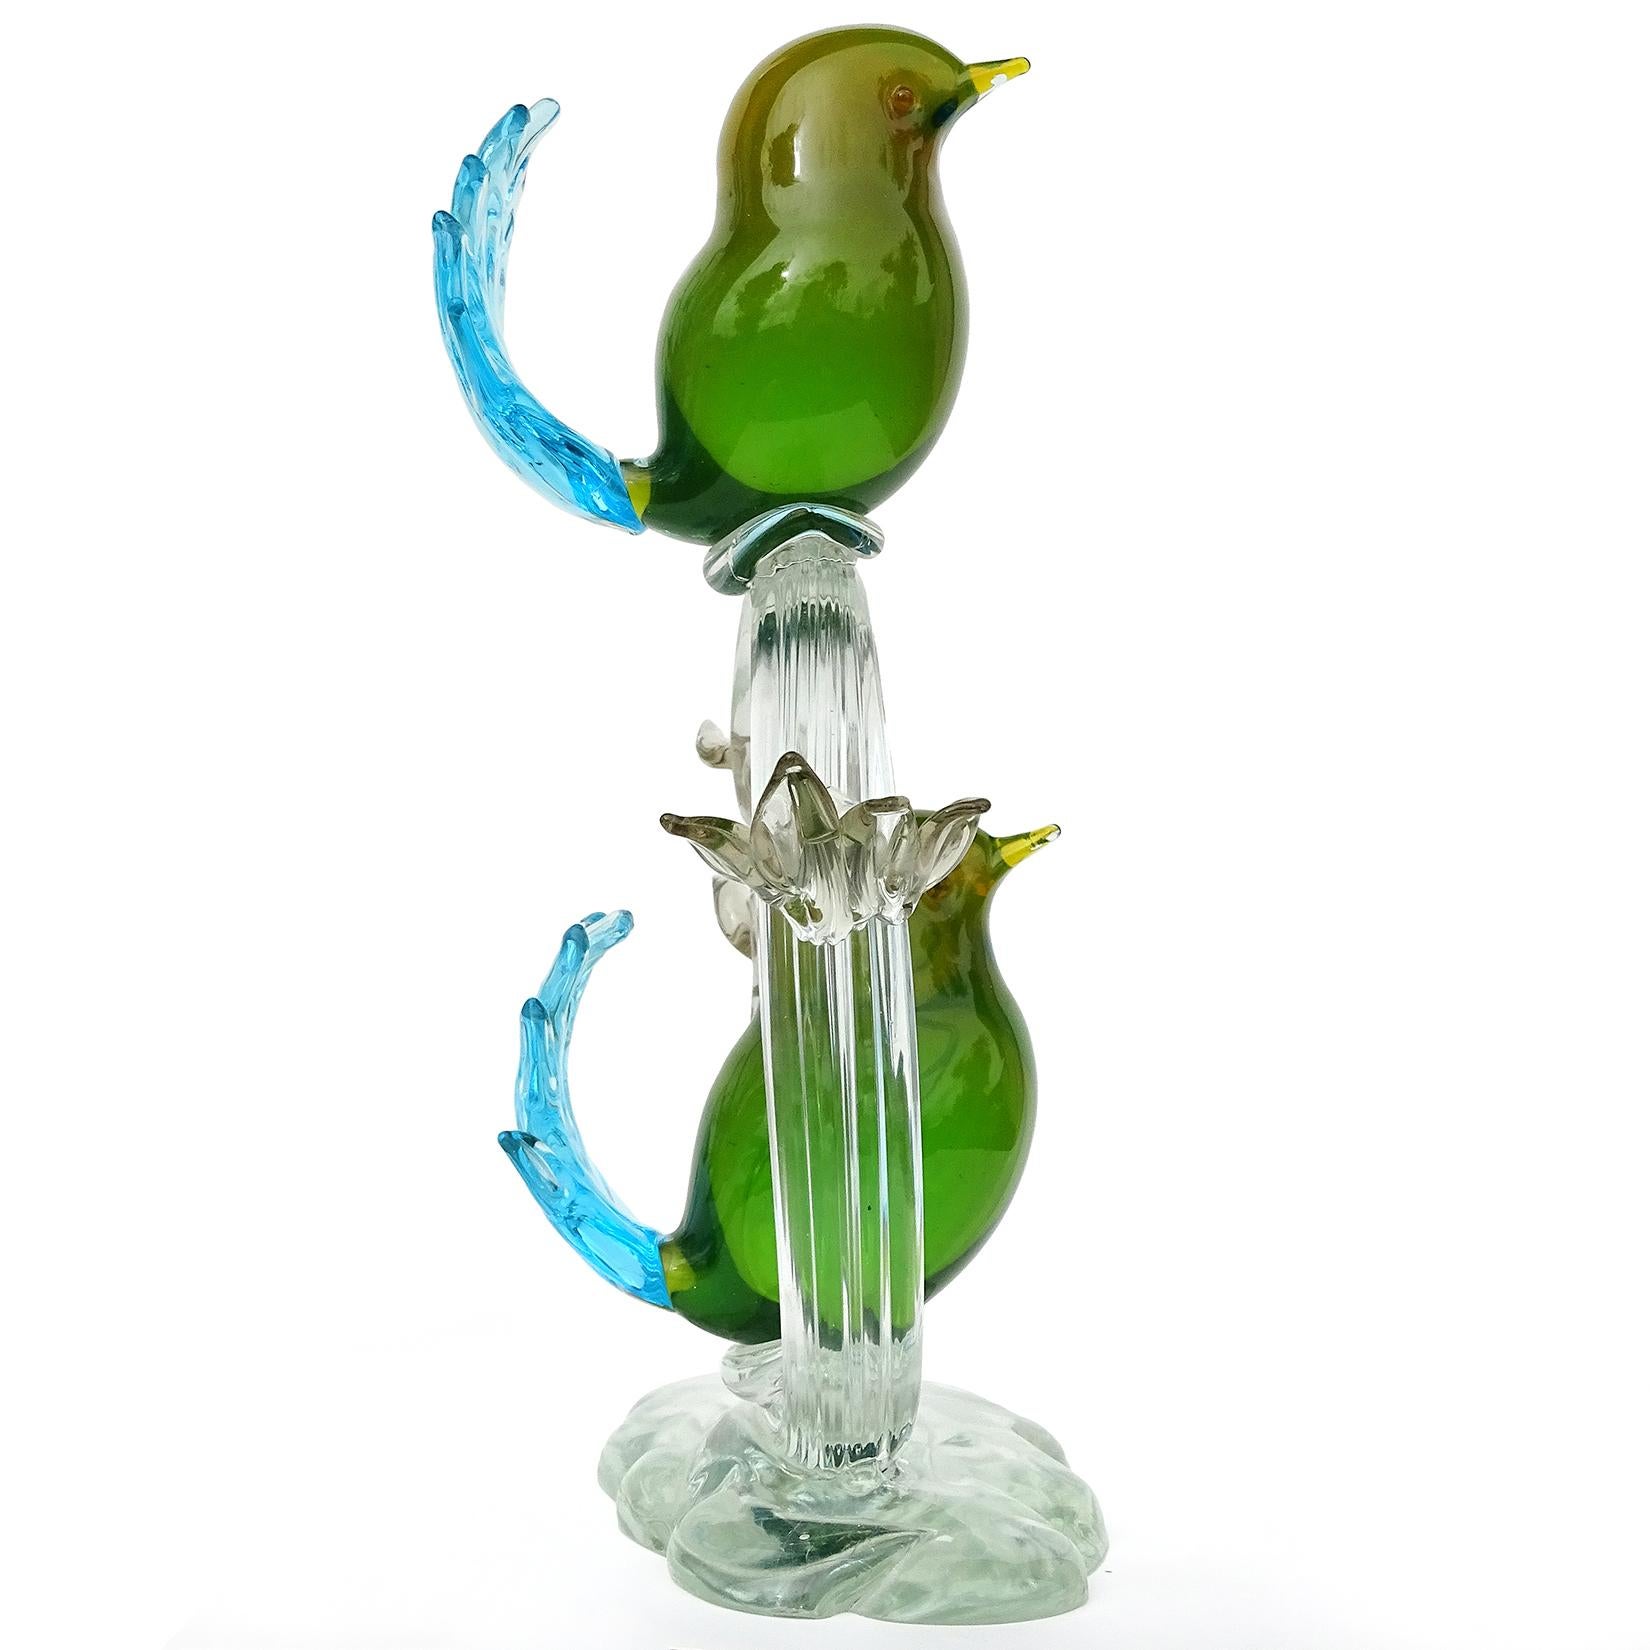 Beautiful and large, vintage Murano hand blown Sommerso green yellow, with blue tails Italian art glass birds sculpture. Attributed to the Salviati company. The birds are made with some Uranium glass, and they glow under a black light (see photos).